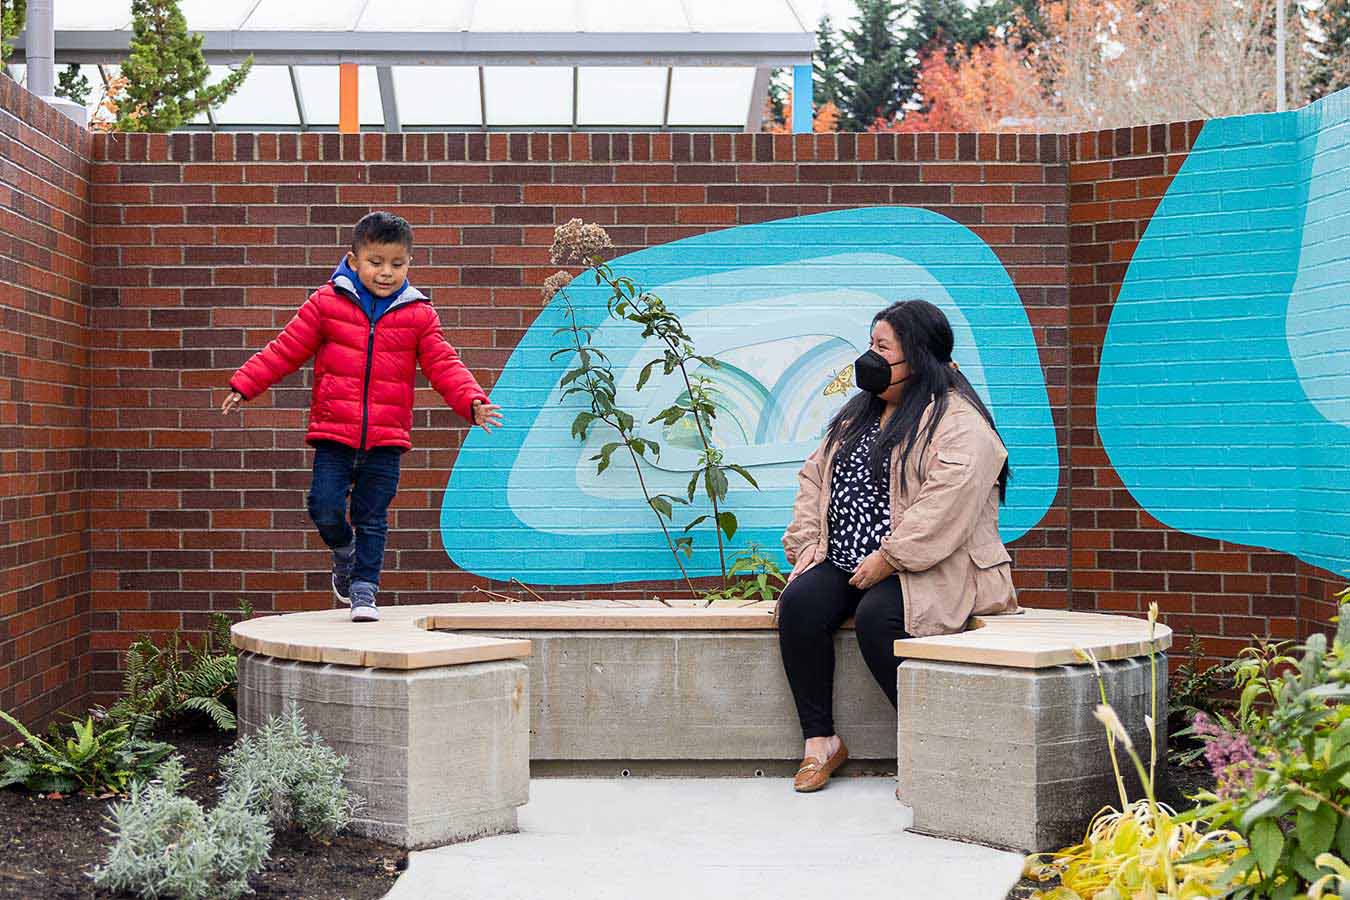 A boy in a red jacket explores the Sensory Garden at Seattle Children's Magnuson